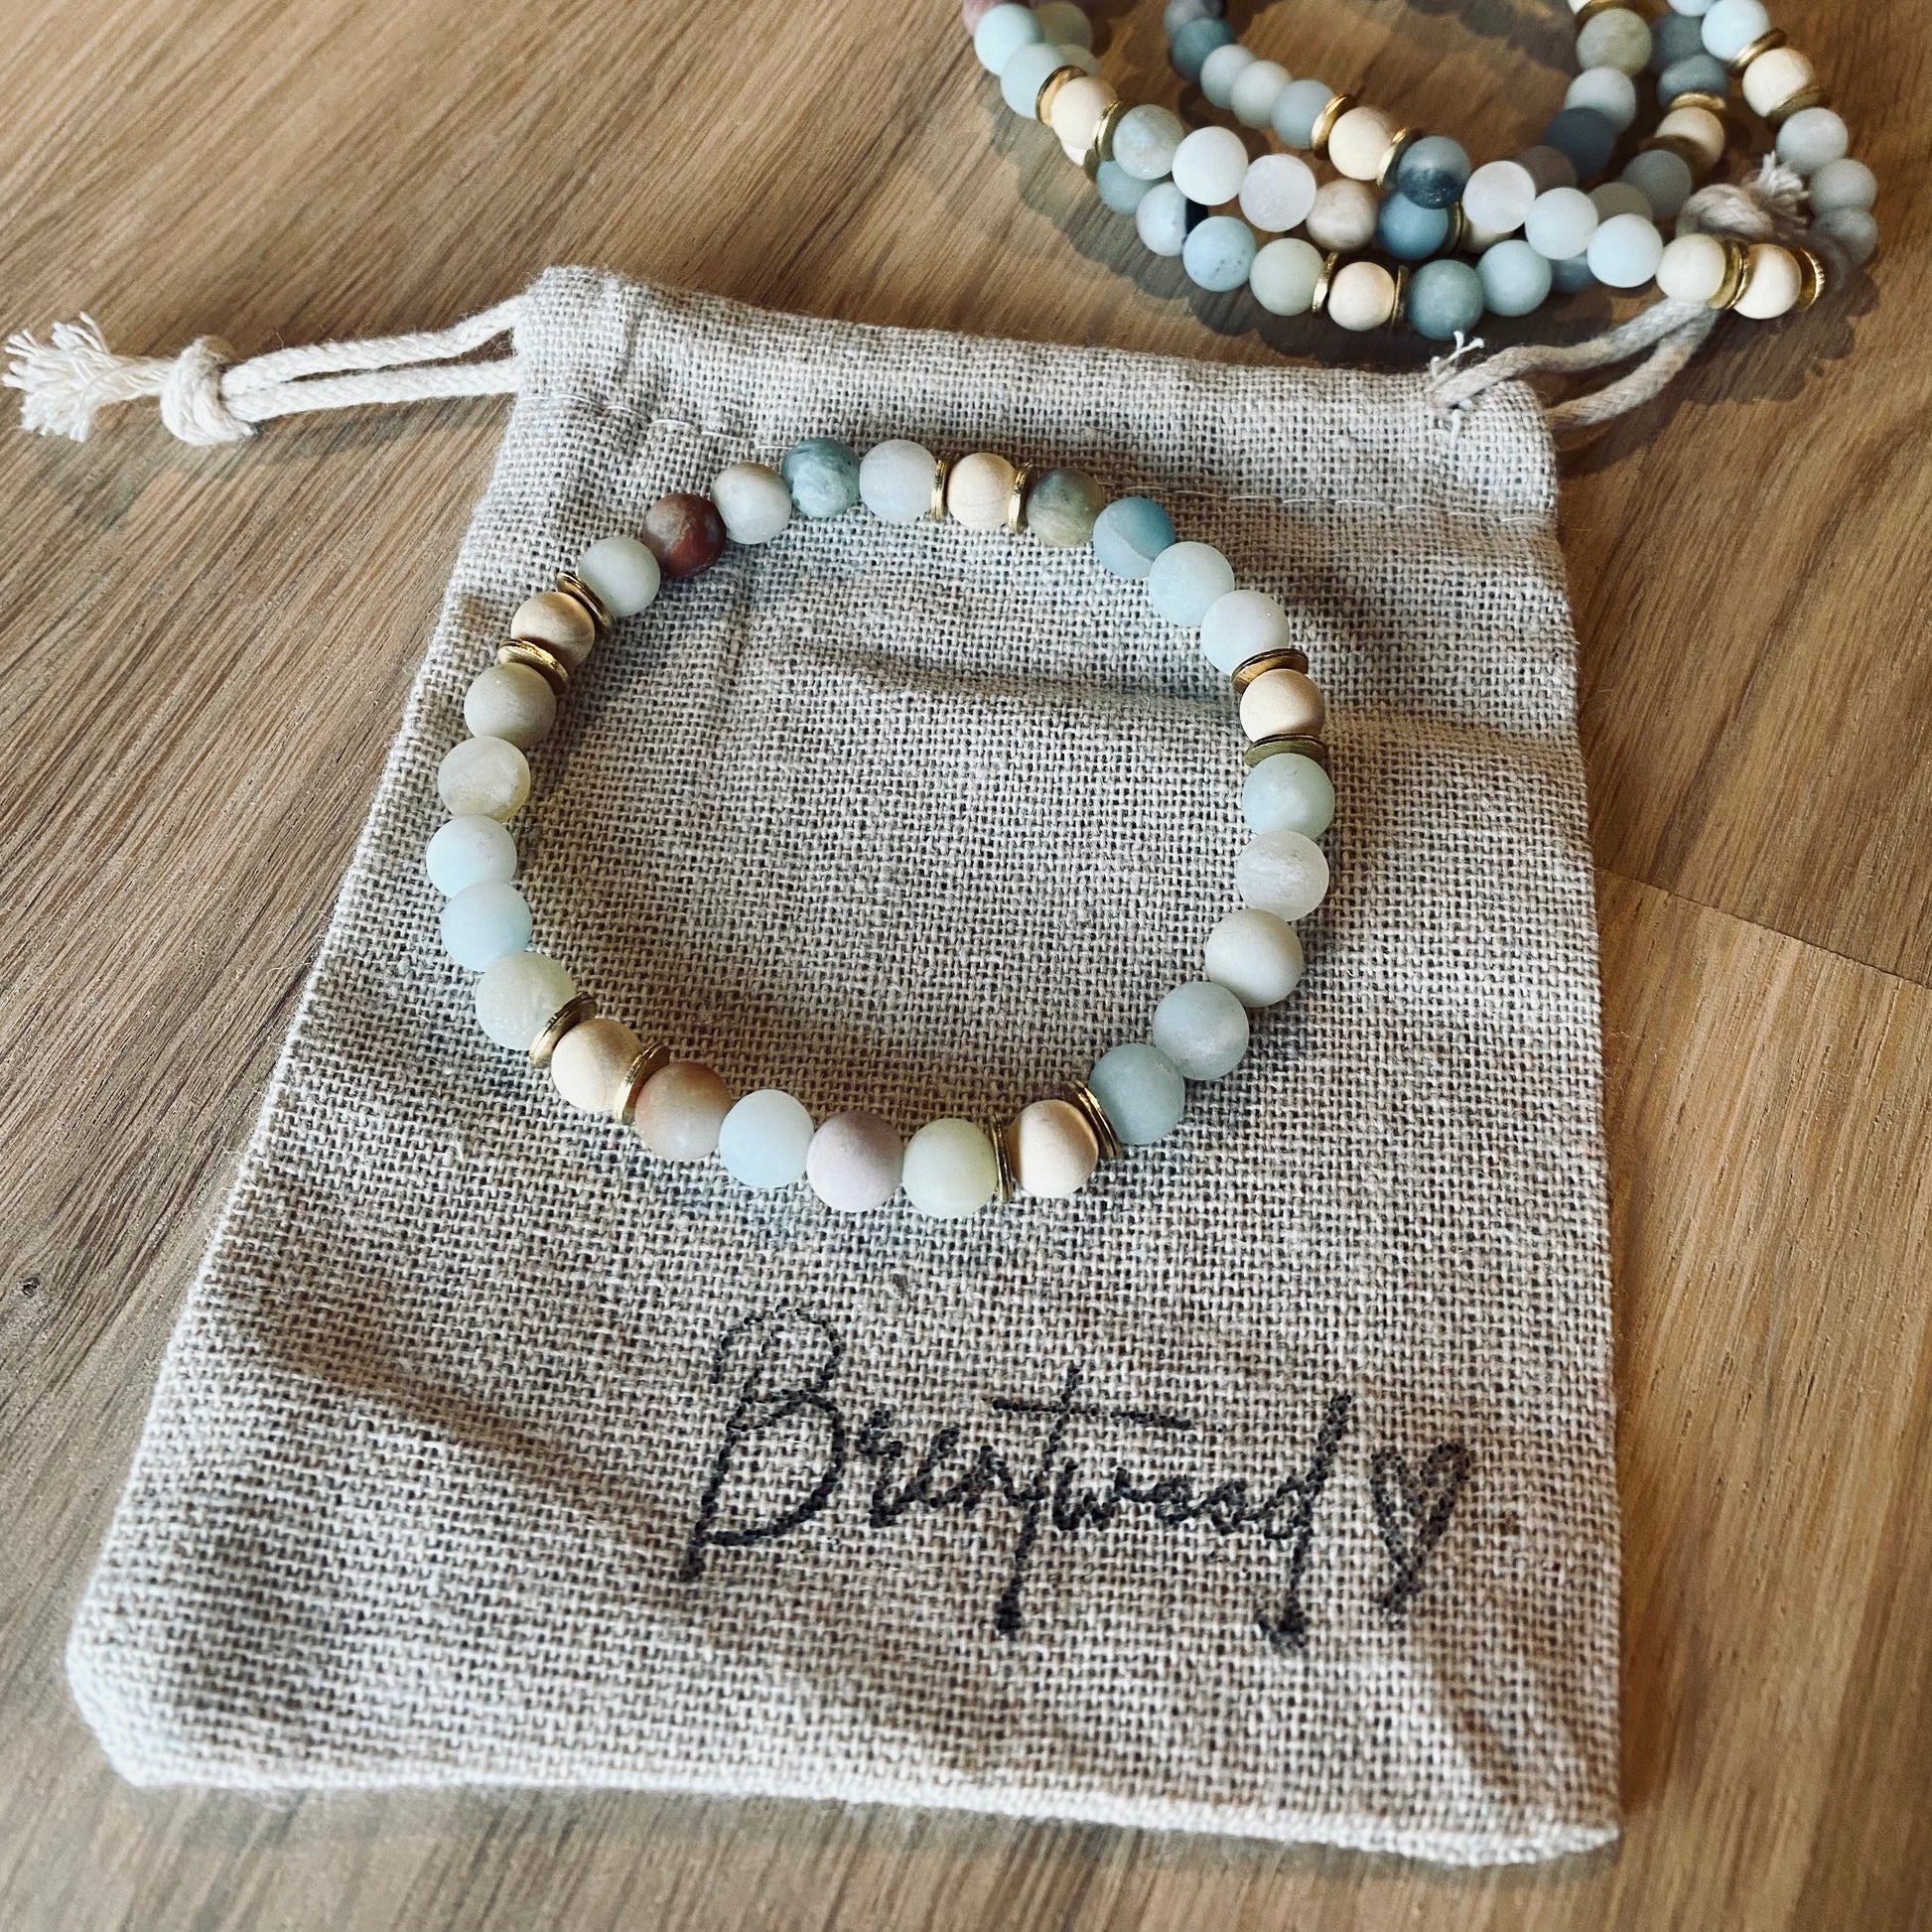 Amazonite aroma bracelet/diffuser bracelet made from 6mm amazonite & natural white wood beads with brass heishi disc embellishments. Laid on cloth pouch/drawstring bag stamped with “Brentwood” and a heart.